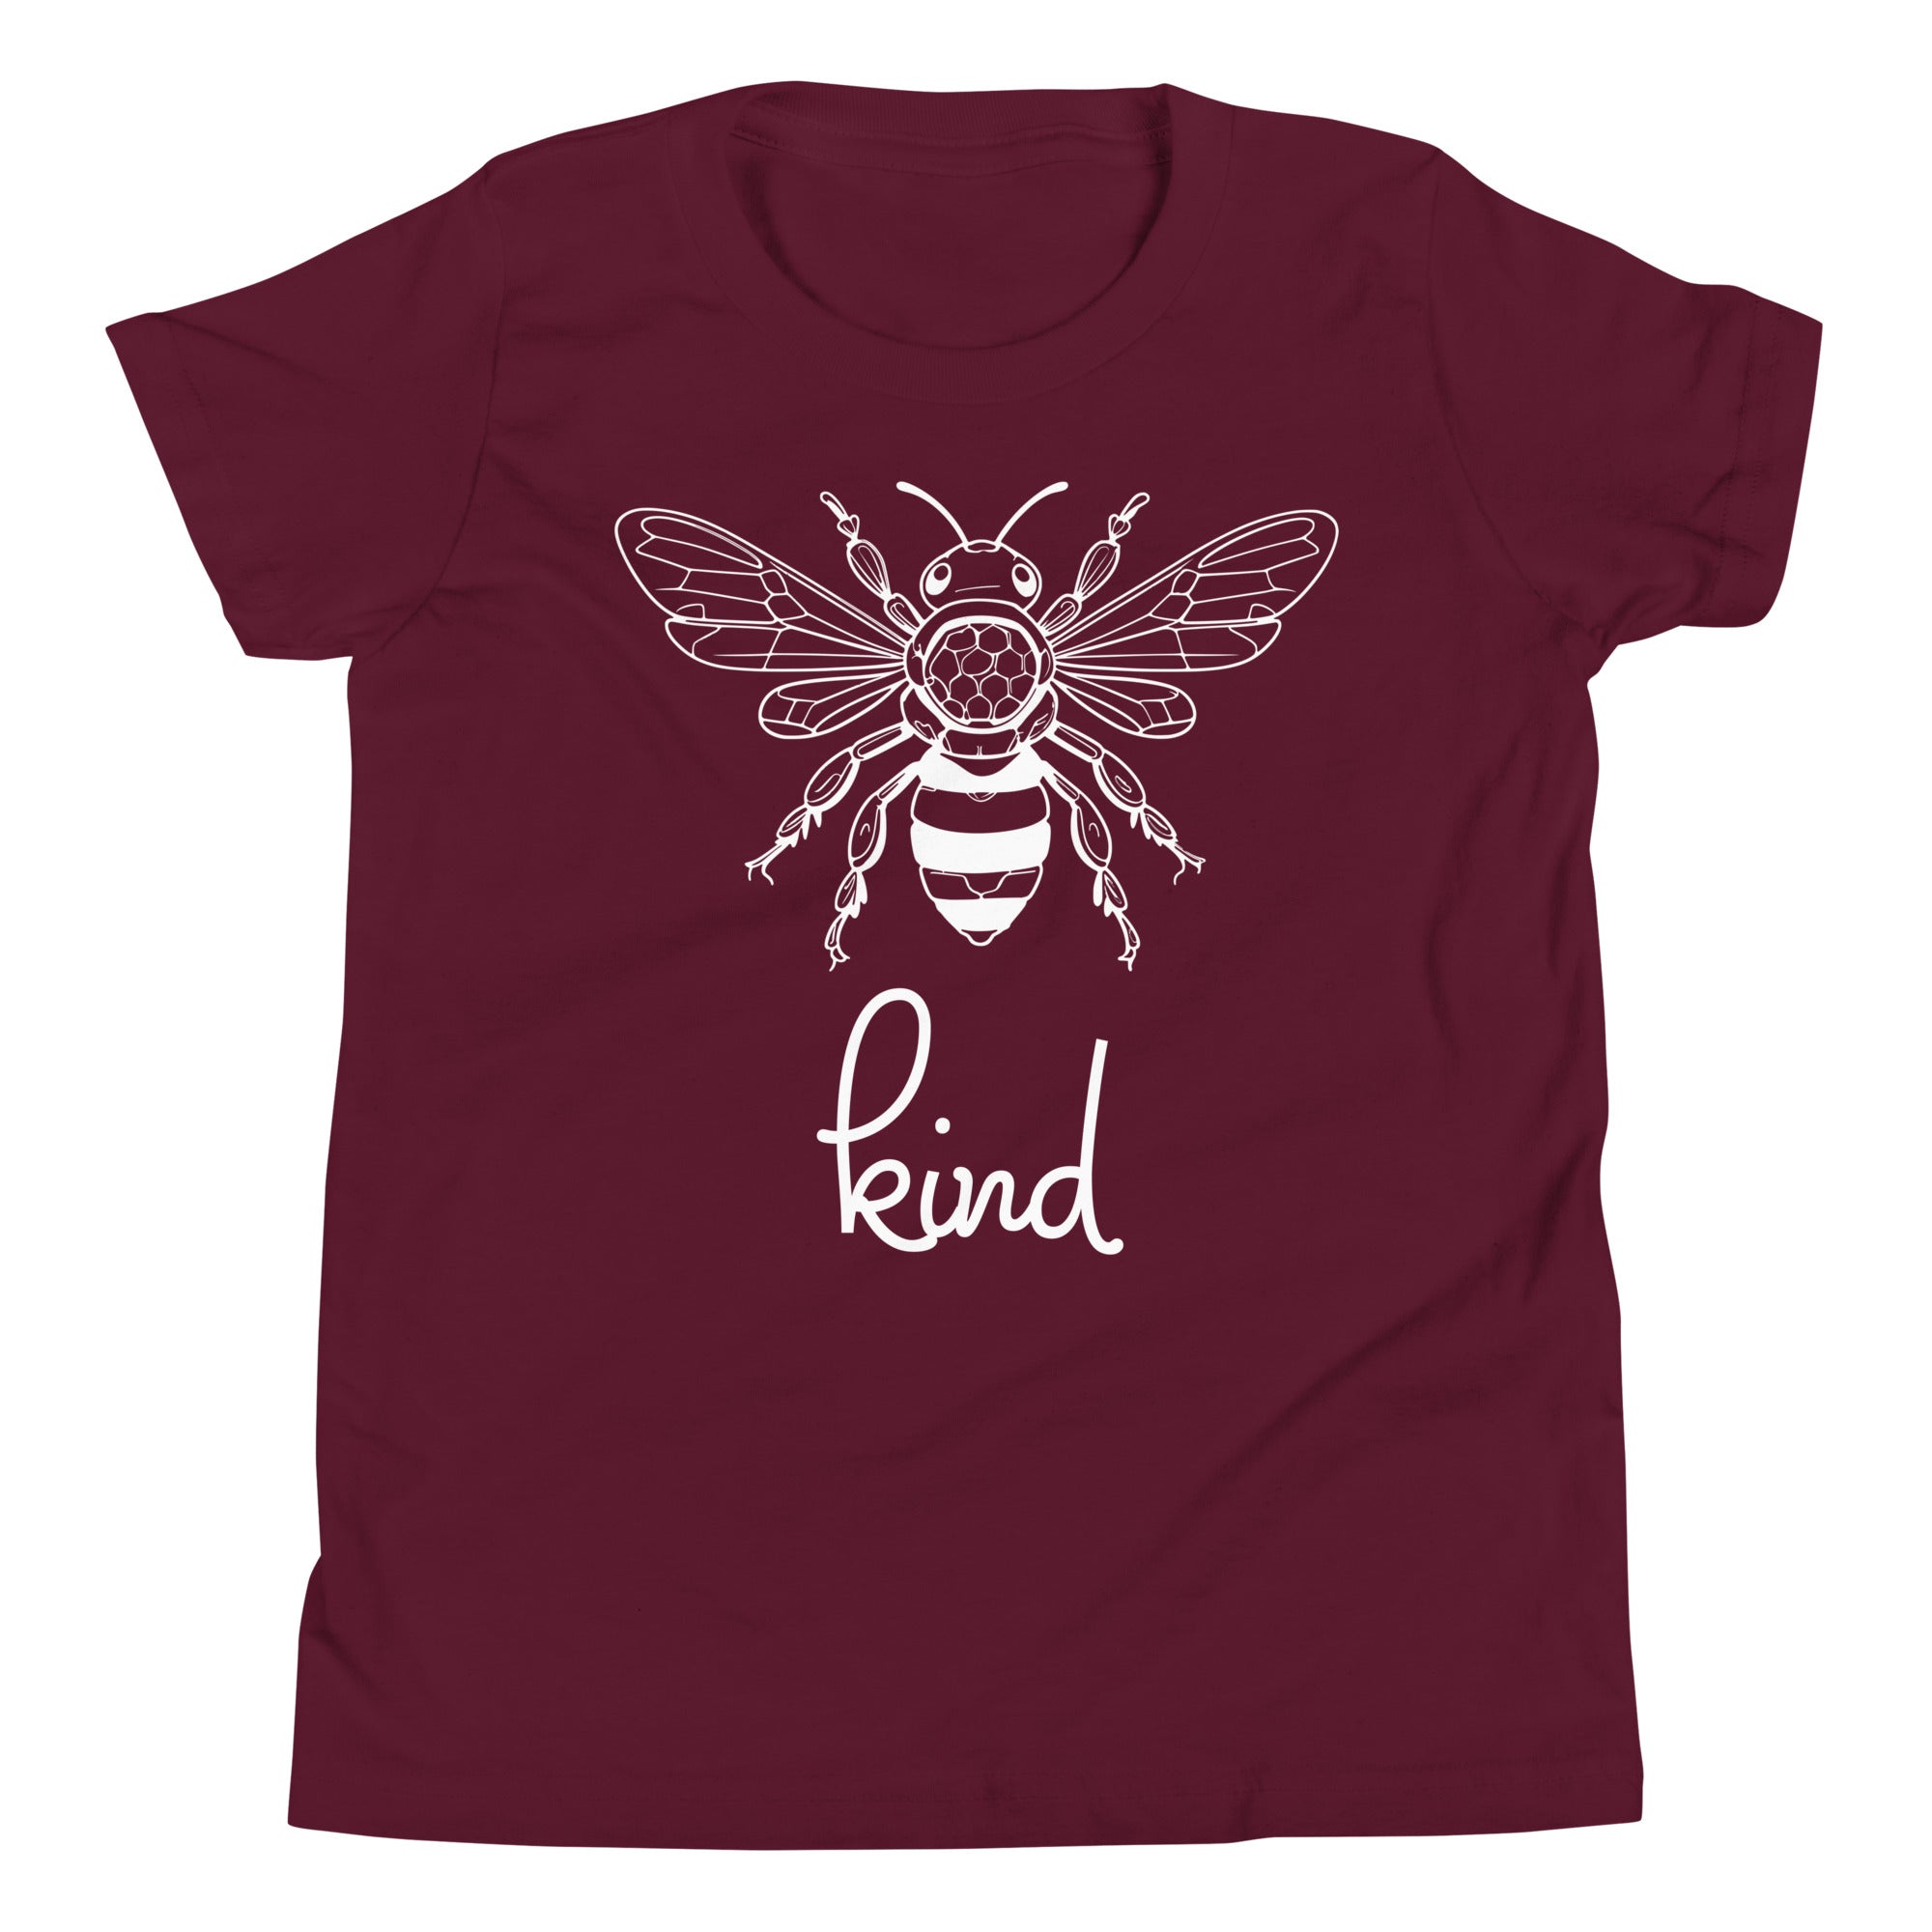 Bee Kind Youth T-Shirt, Gift For Bee Lovers Maroon YS YL YXL YM DenBox